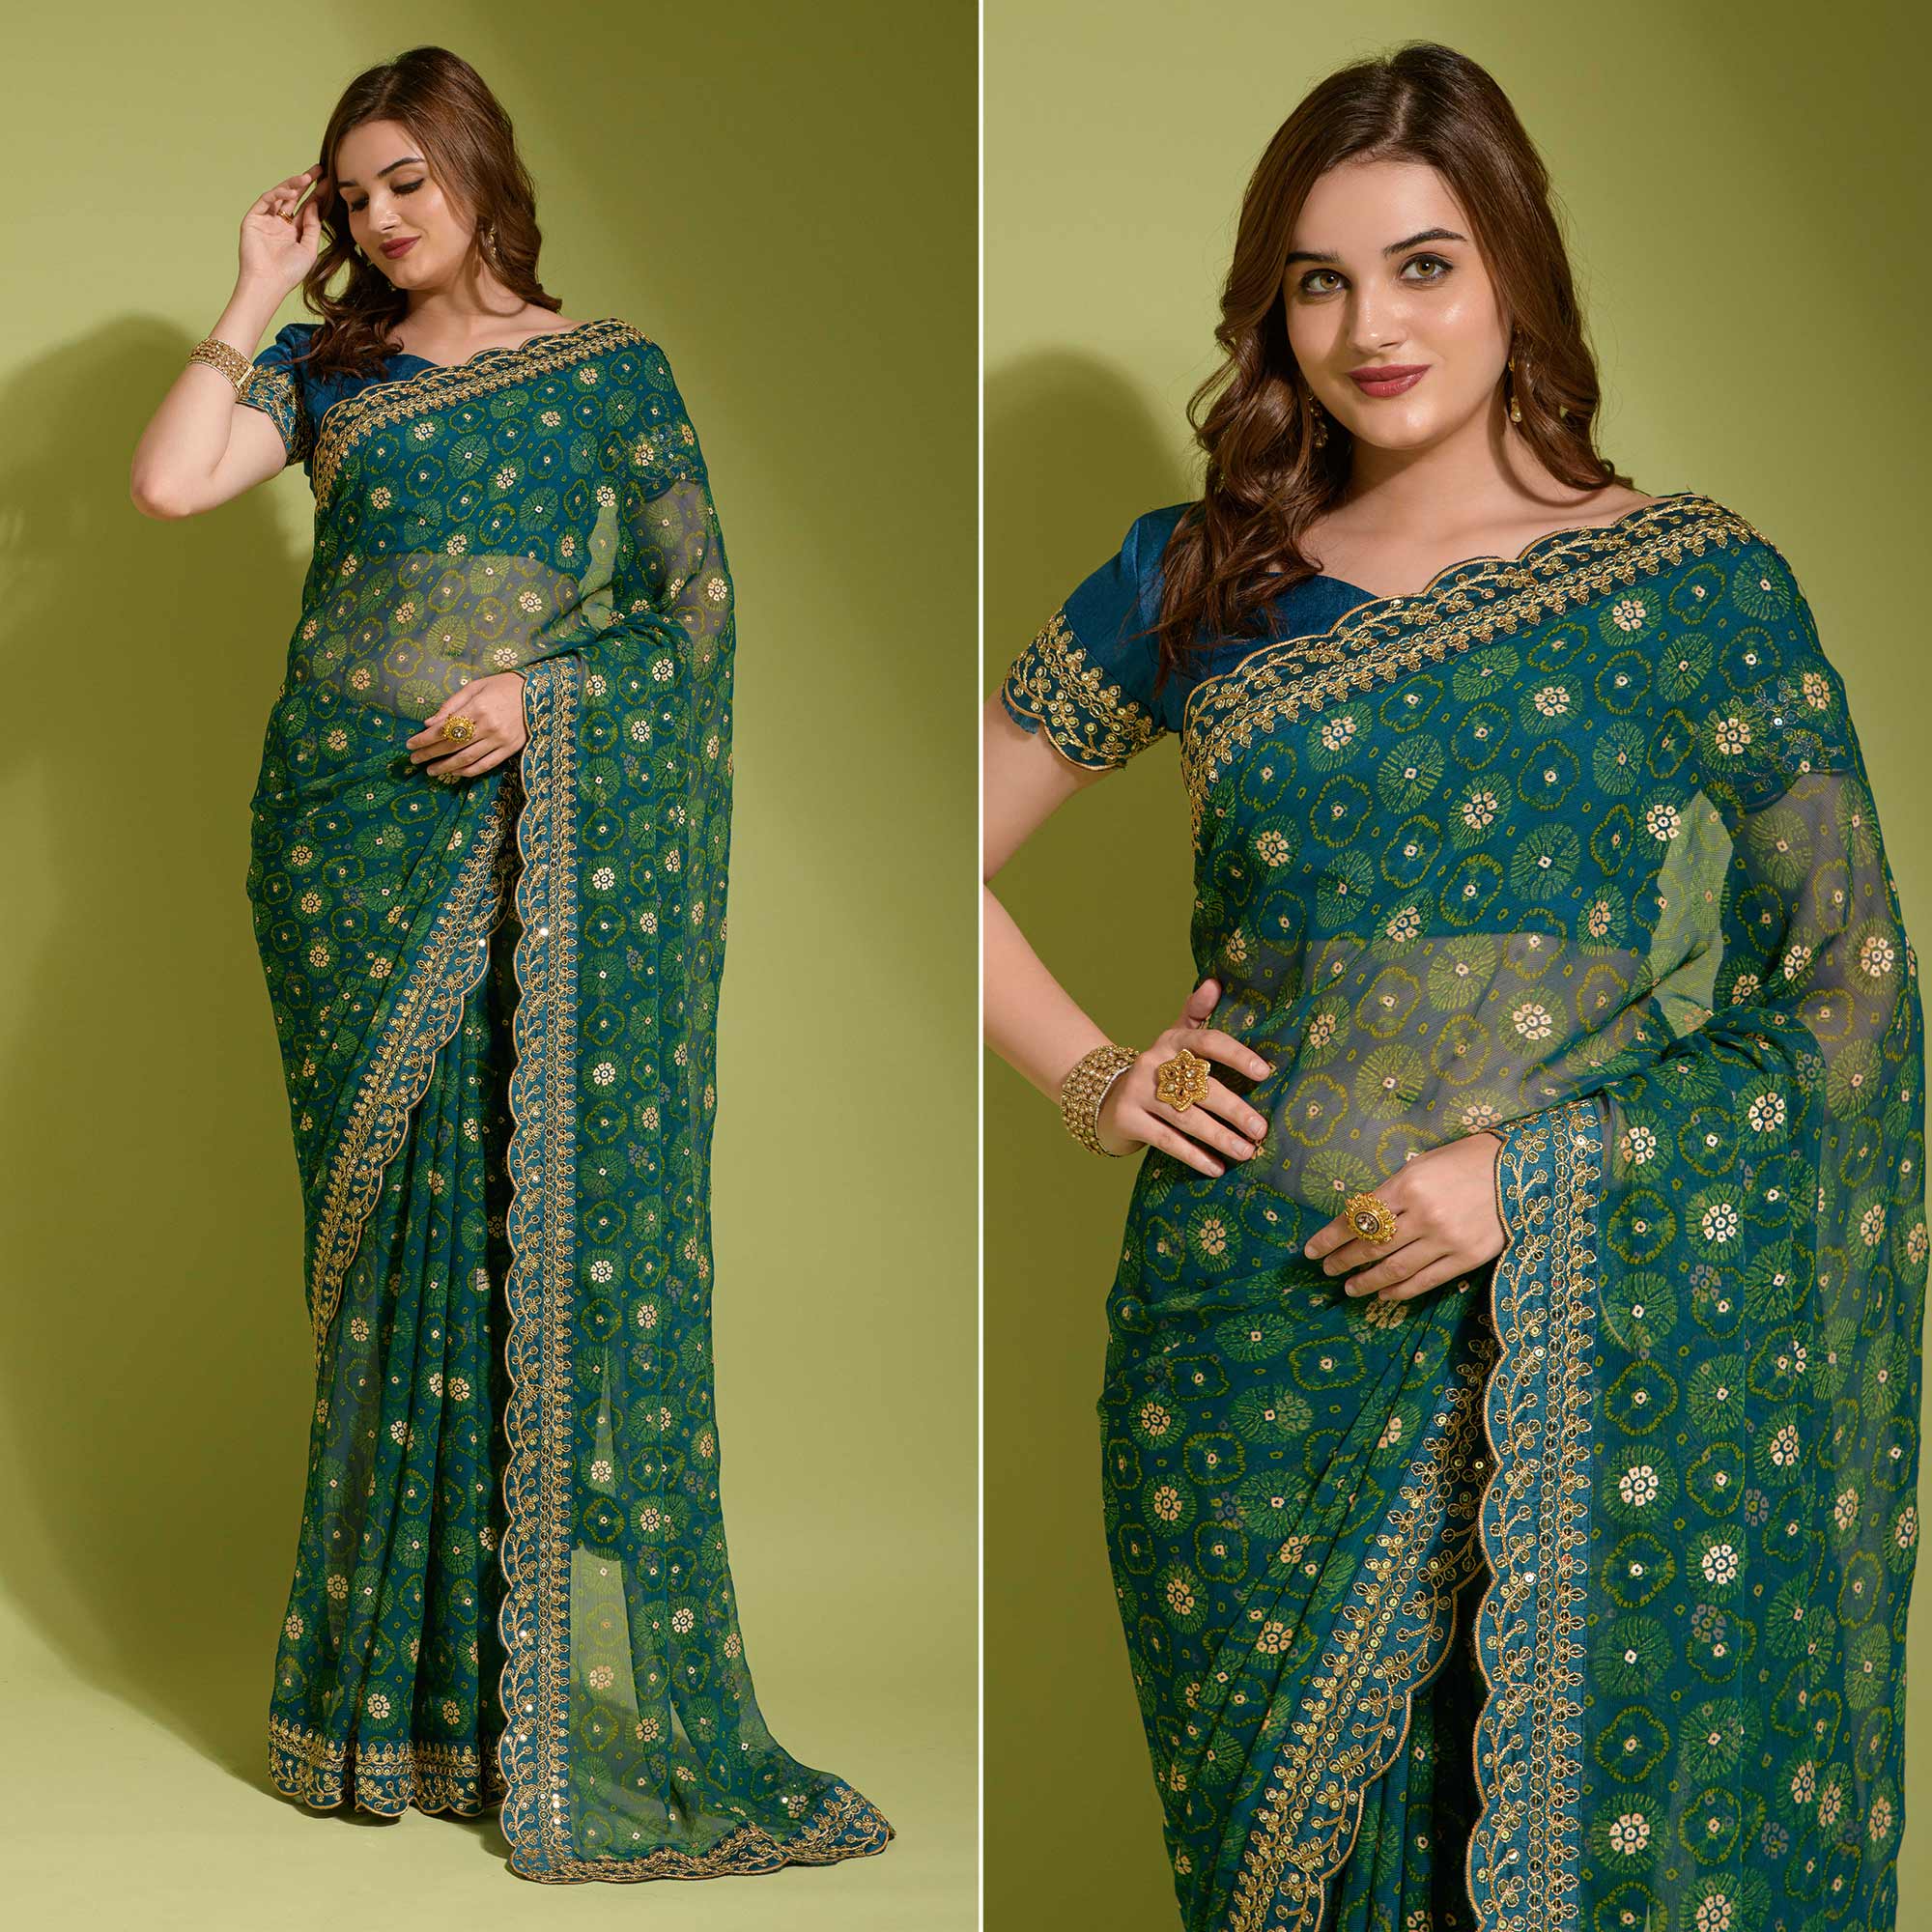 Teal Bandhani Foil Printed Georgette Saree With Embroidered Border